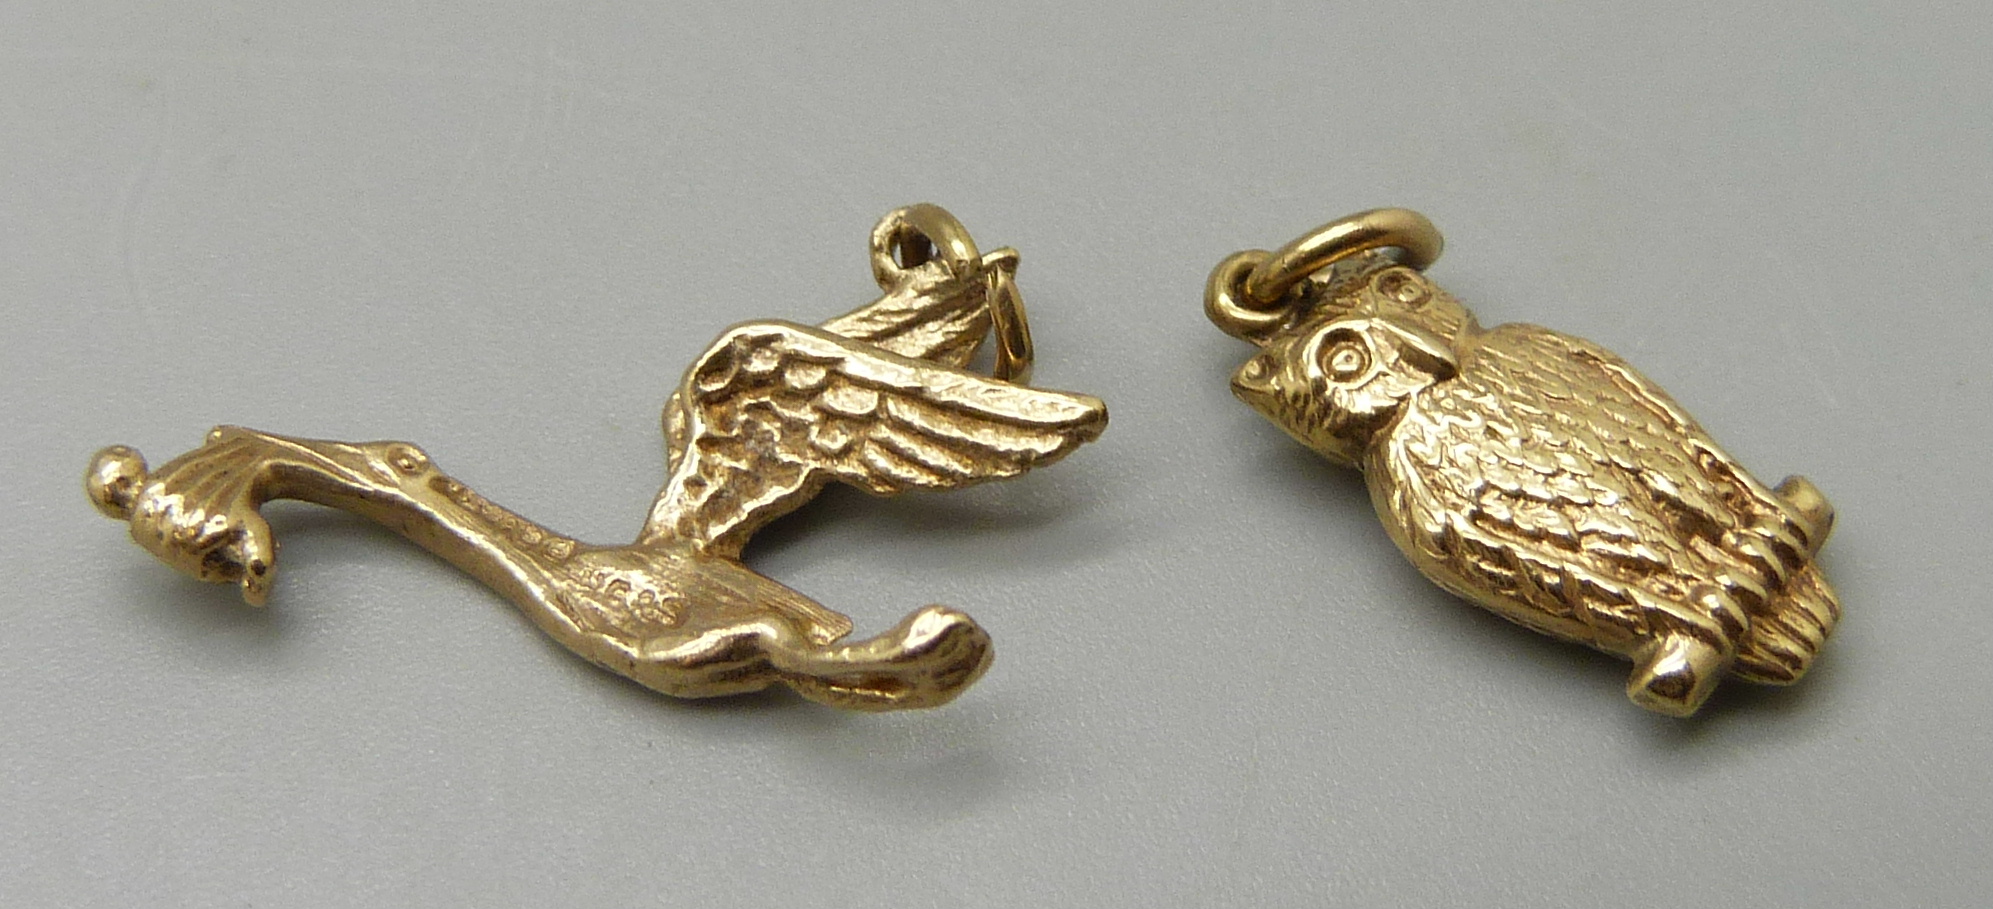 A 9ct gold stork and baby charm and a 9ct gold owl charm, 1.9g